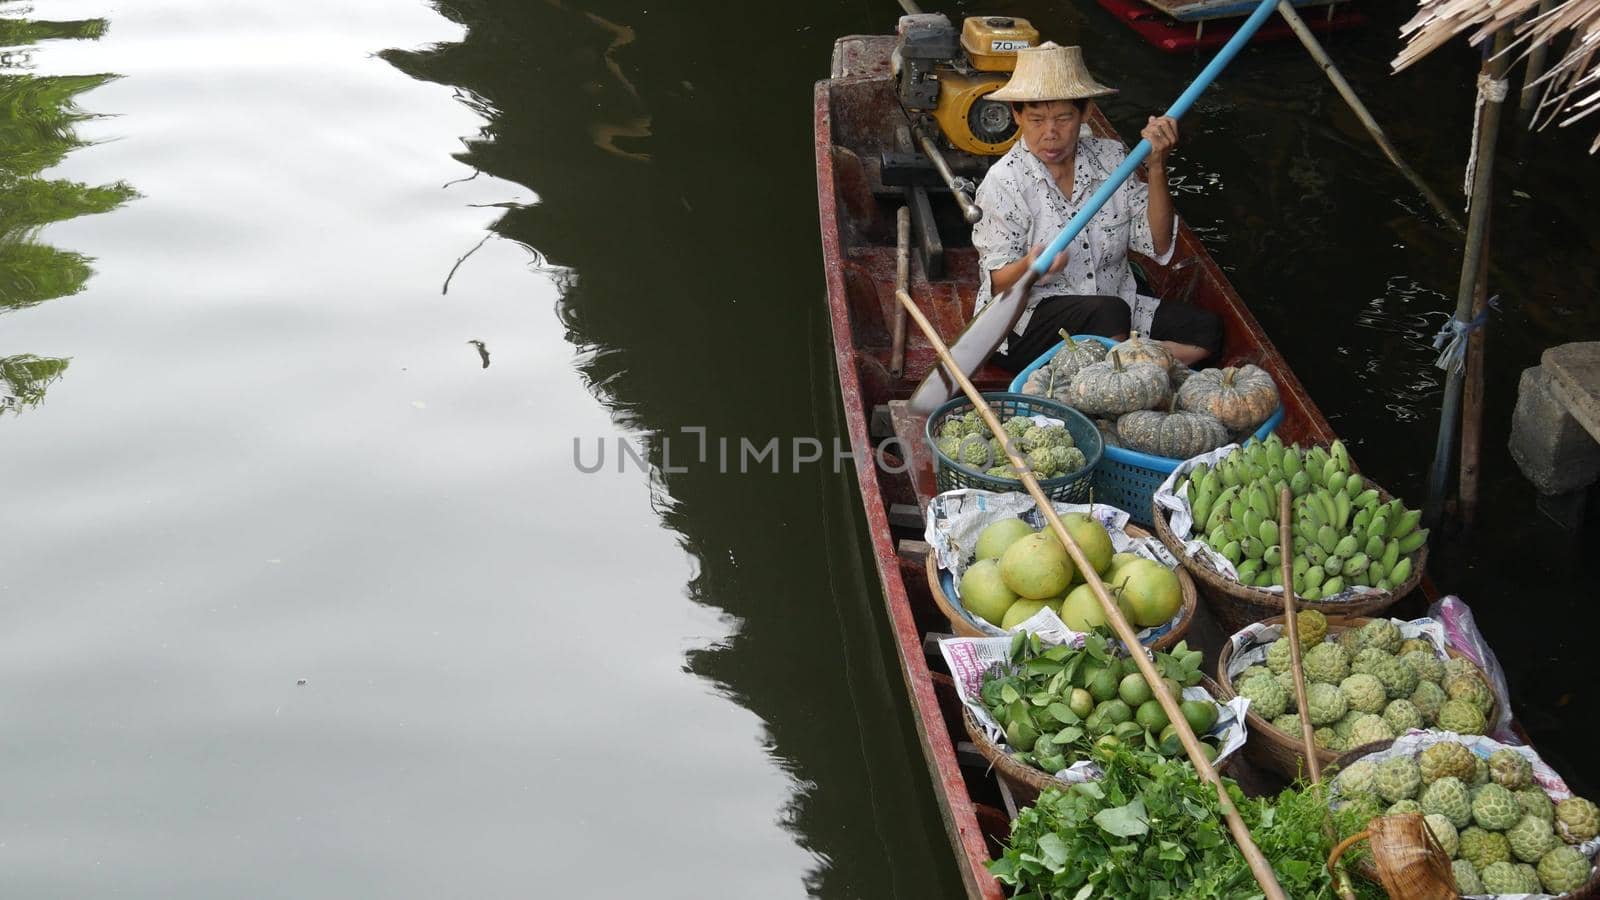 BANGKOK, THAILAND - 13 JULY 2019: Lat Mayom floating market. Traditional classic khlong river canal, local women farmers, long-tail boats with fruits and vegetables. Iconic asian street food selling